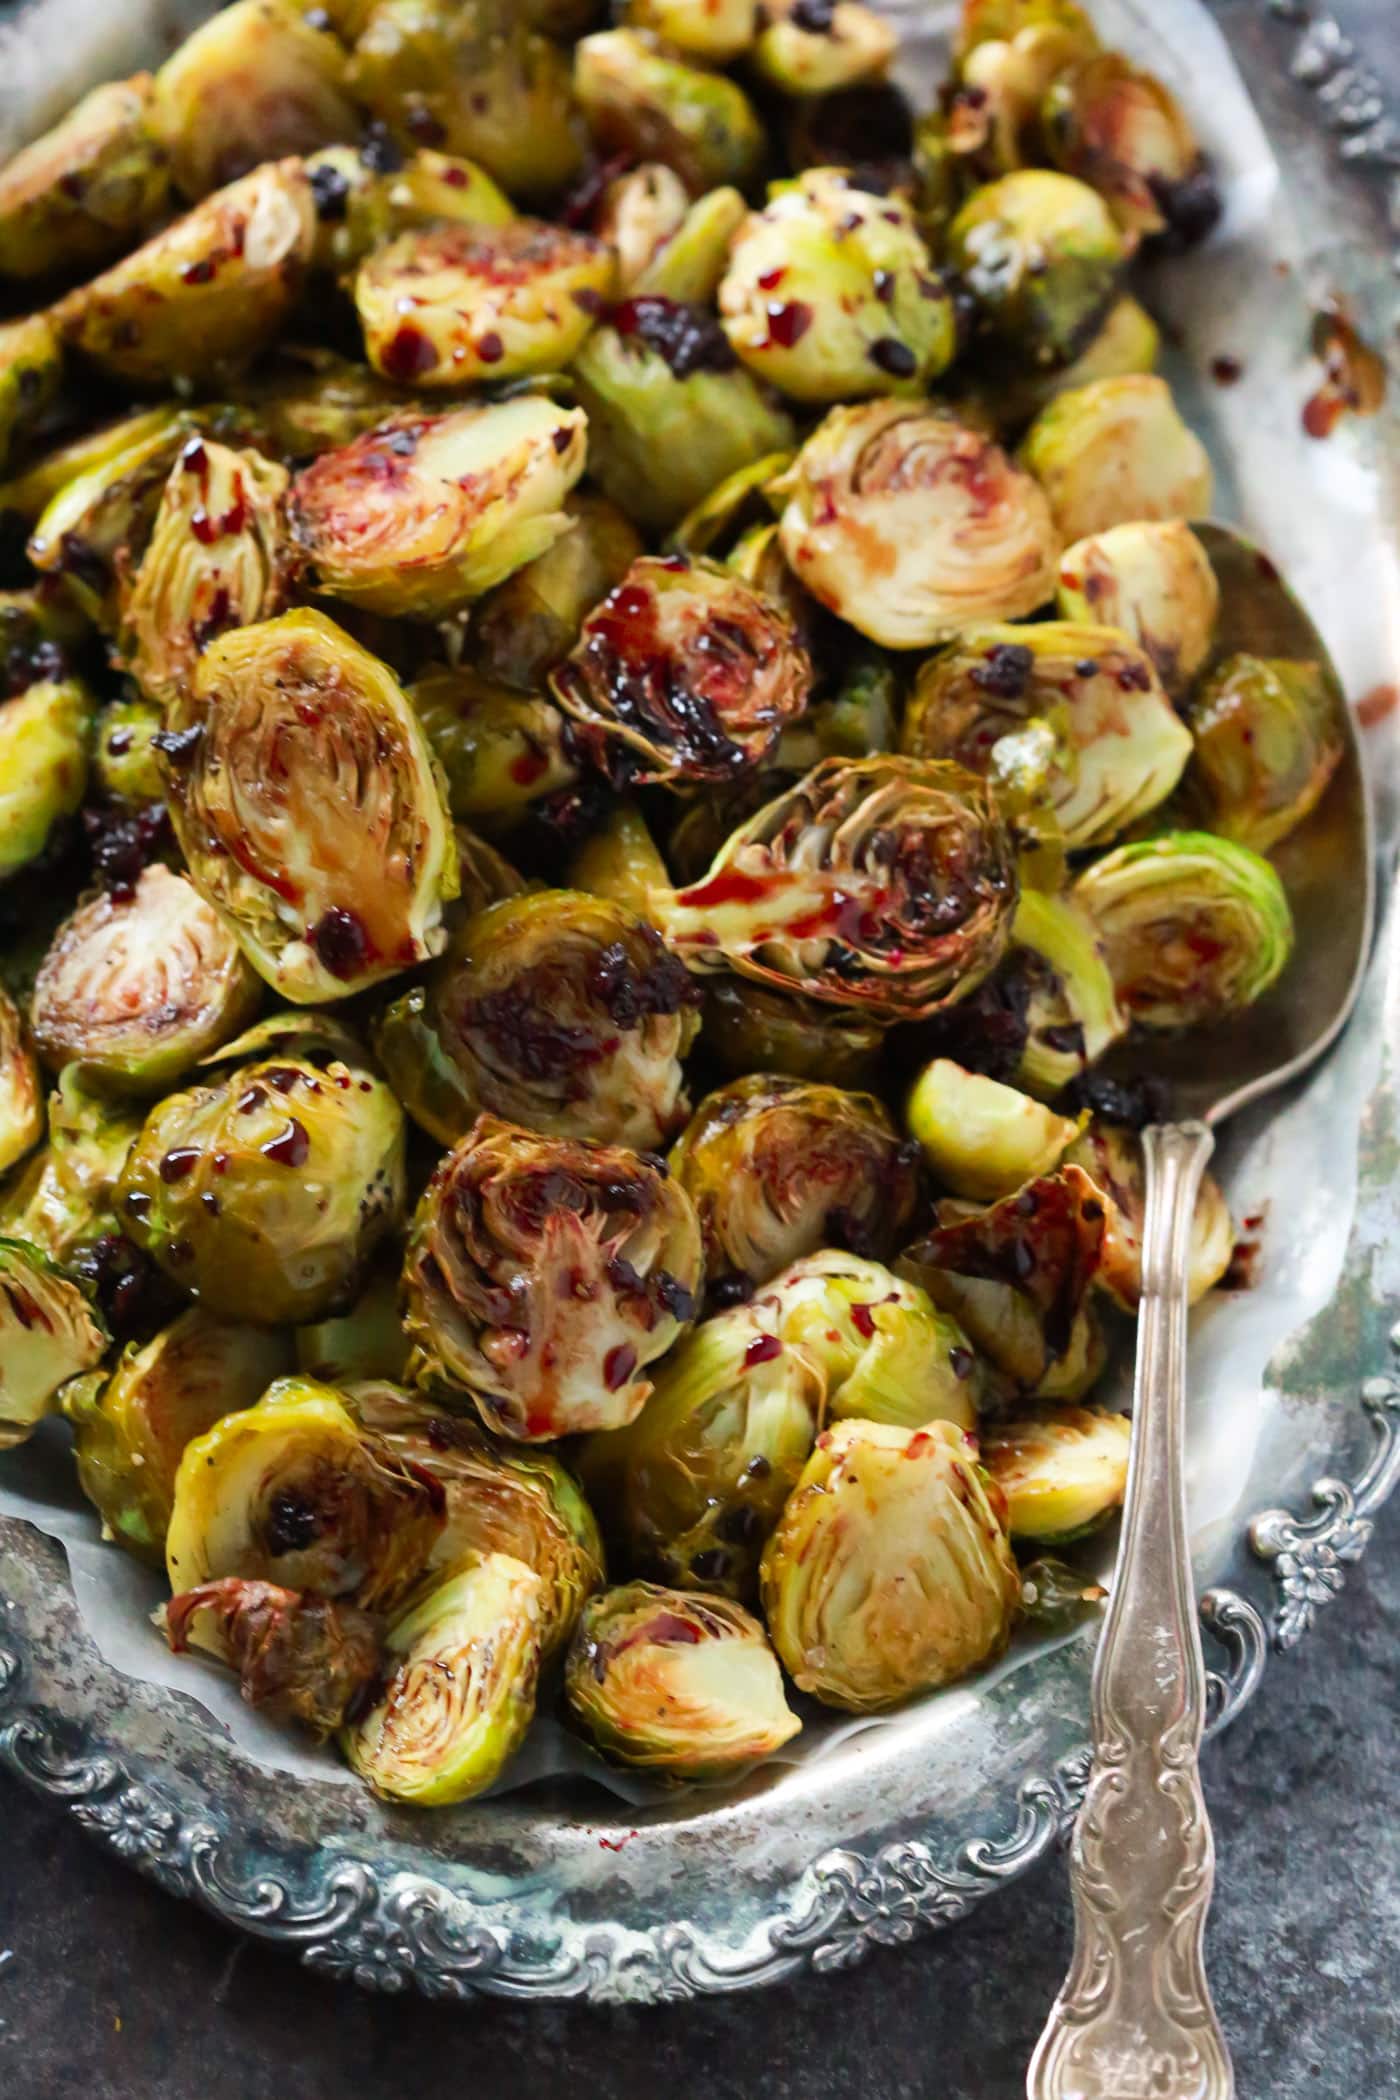 Overhead photo of a platter of pomegranate glazed Brussels sprouts with a large serving spoon tucked in.